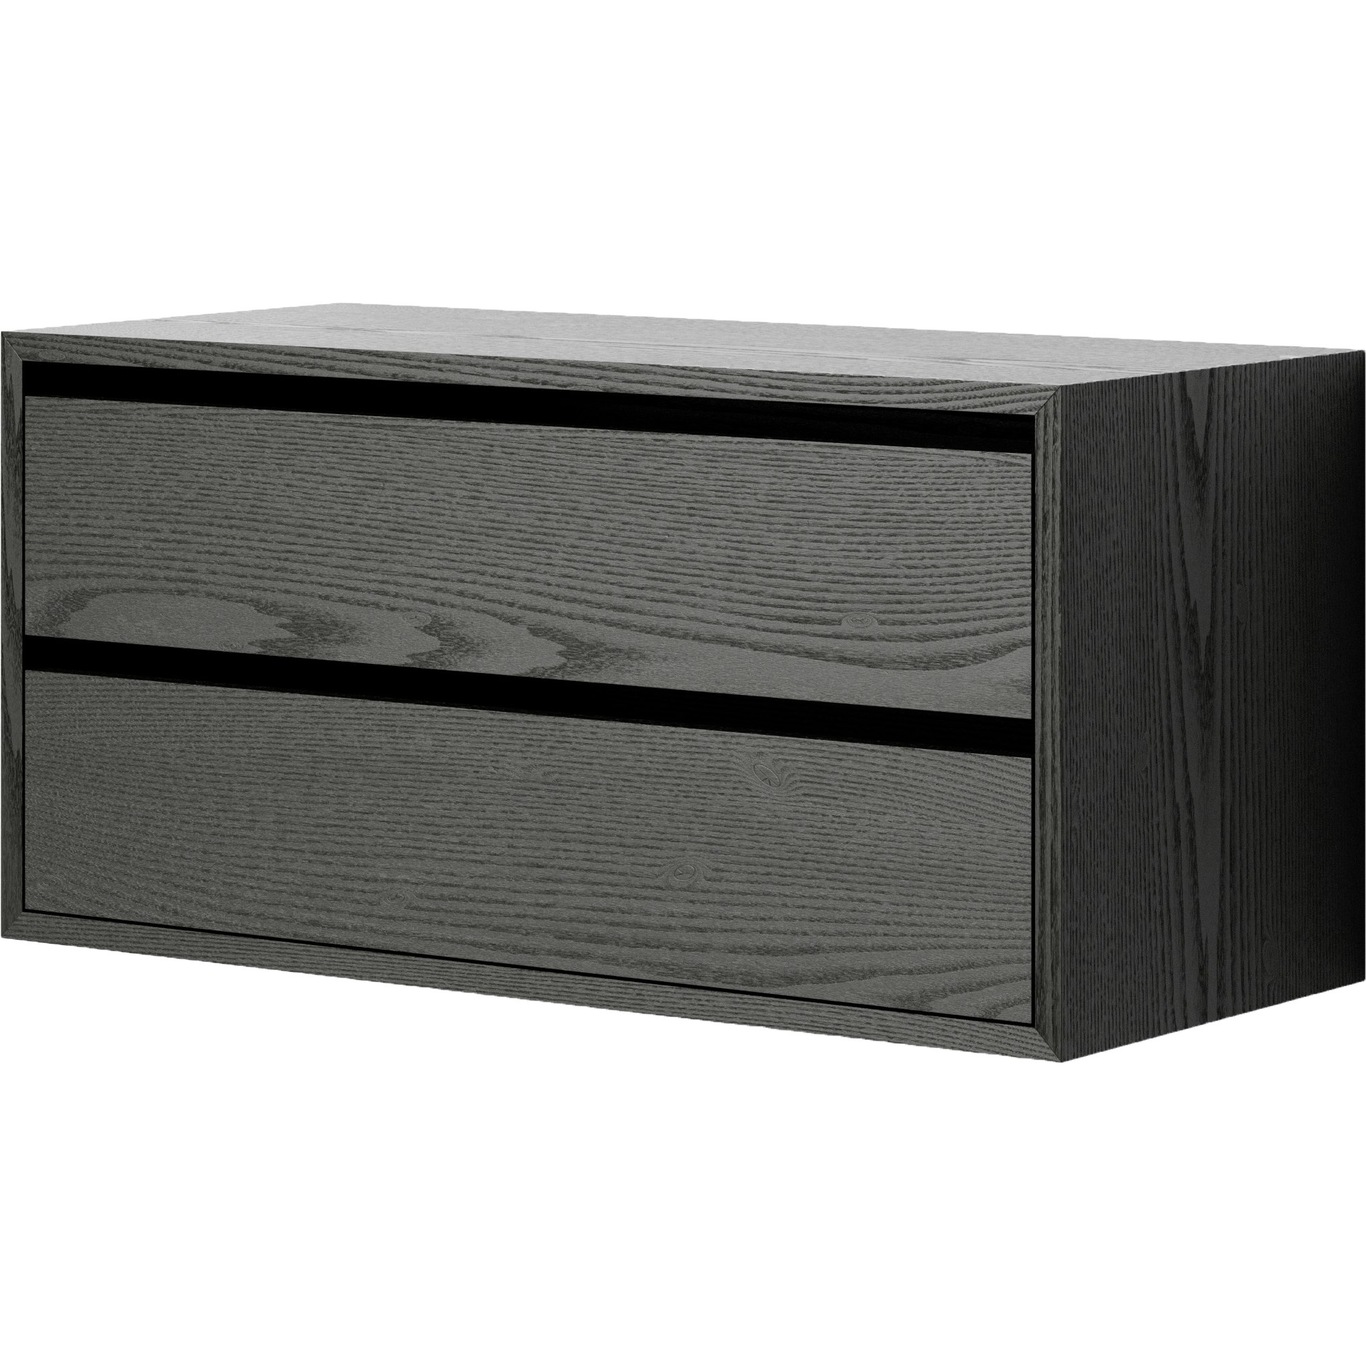 Cabinet With Drawers, Black Ash